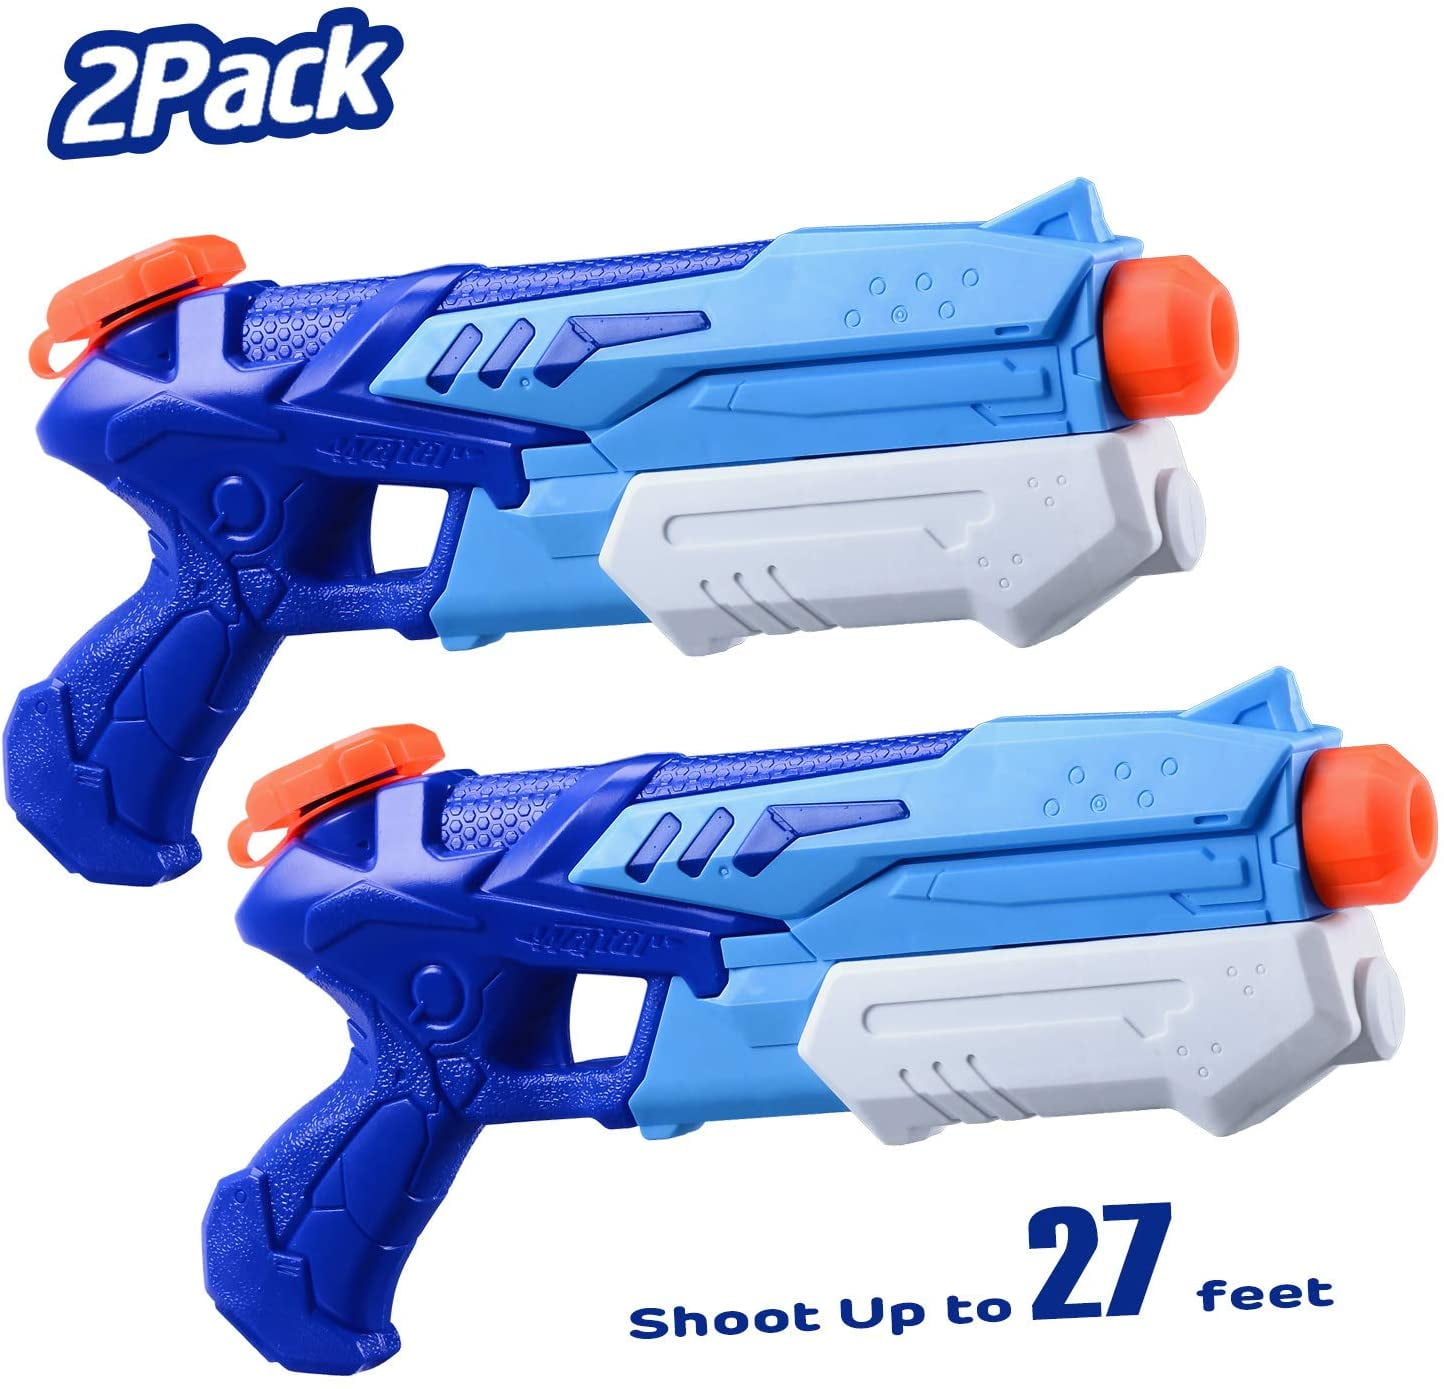 Play 2 Toy Guns Plastic Ball toy Shooter Easy Spring action Ages 3 NEW 6 oz. 